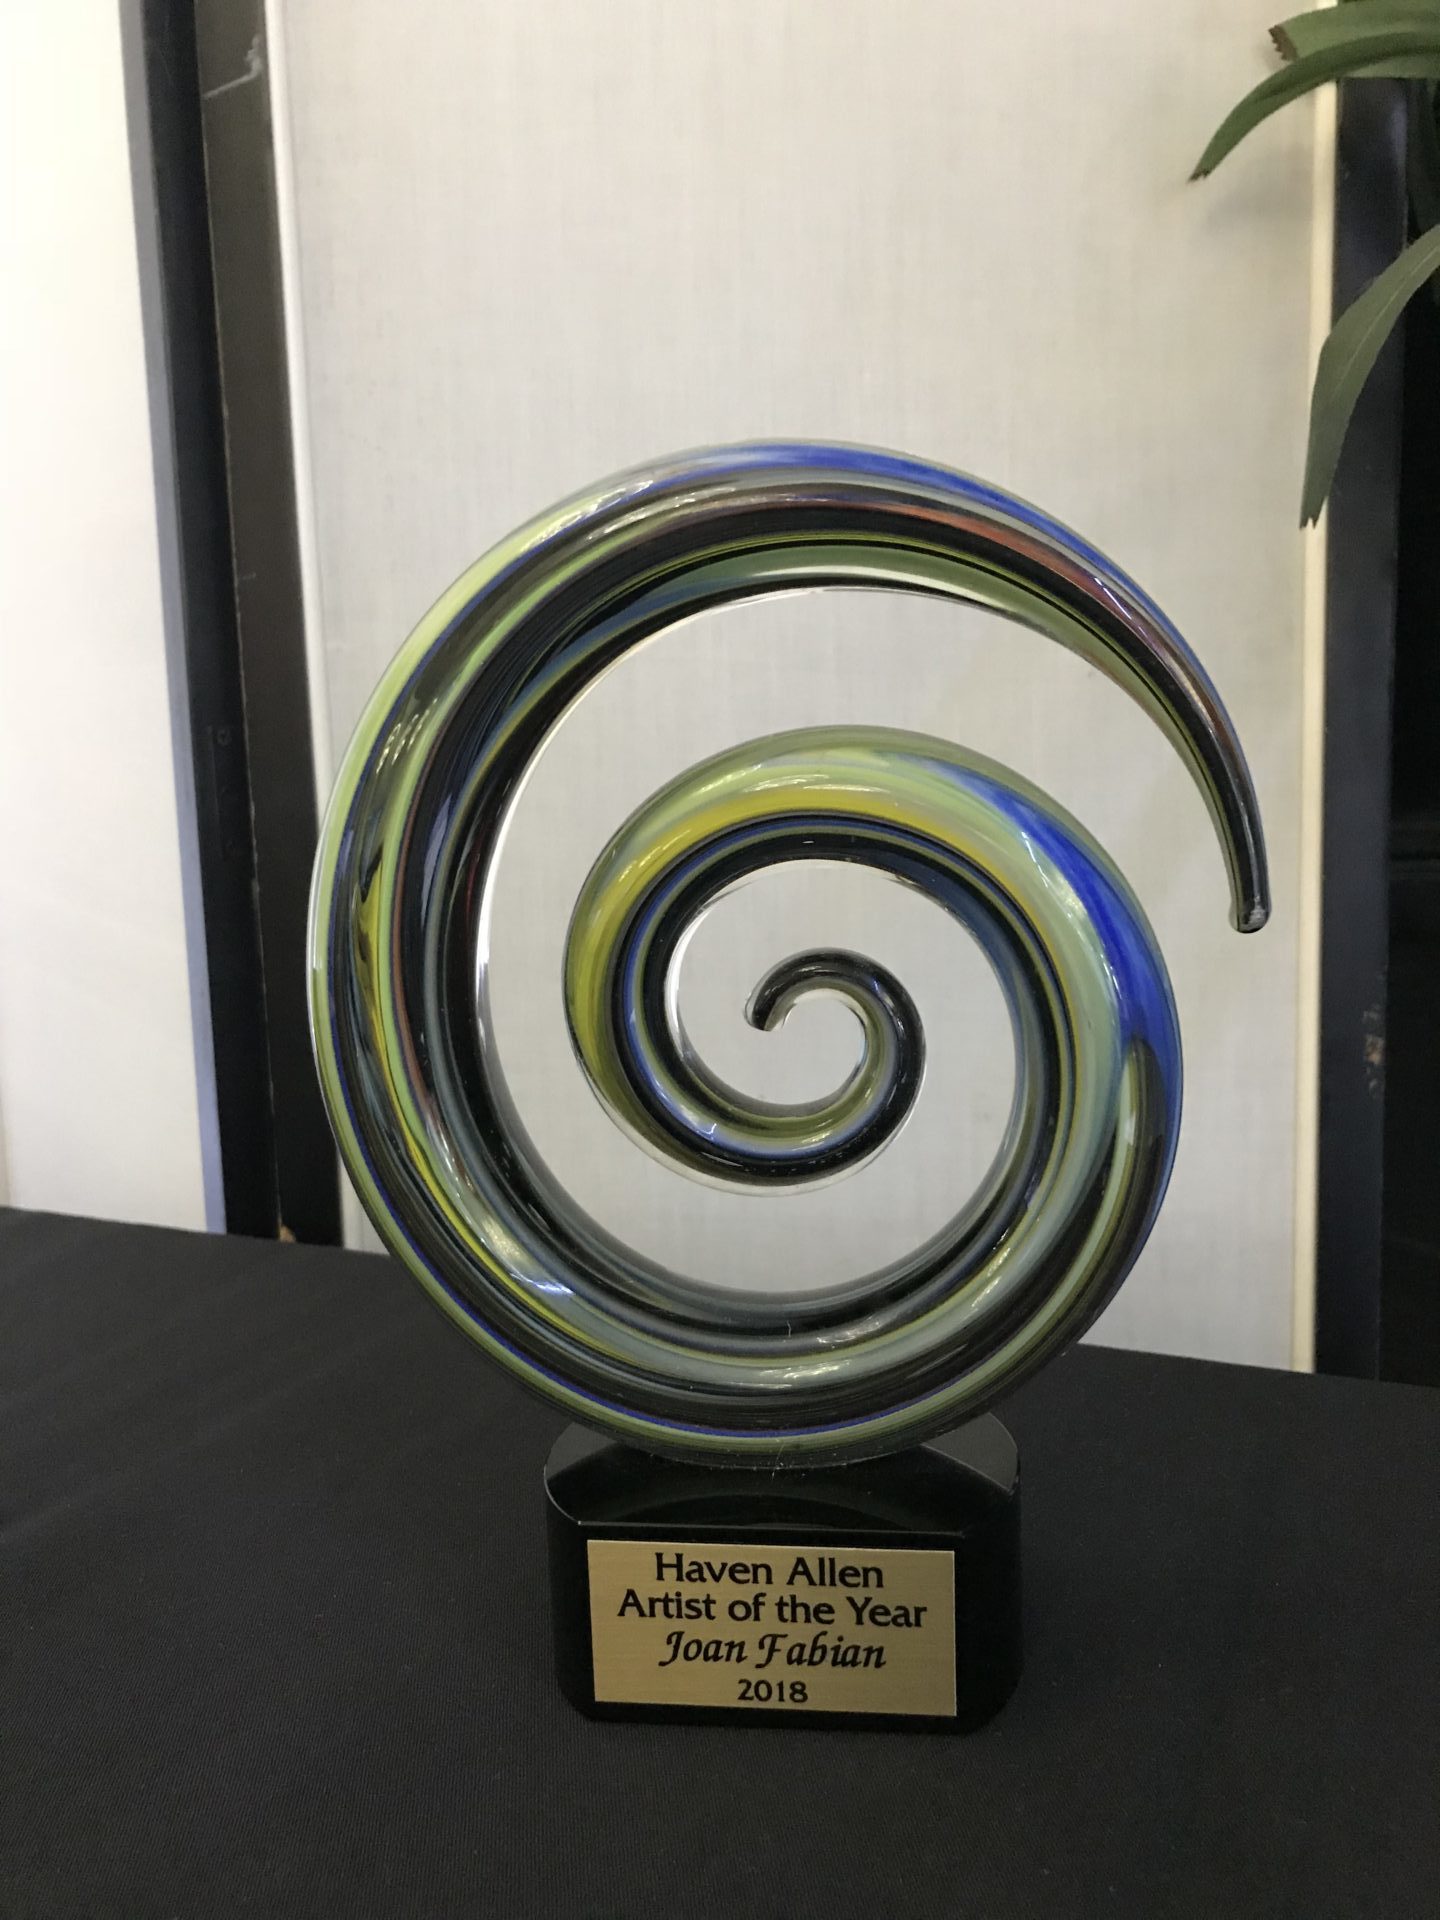 colorful glass spiral with plaque underneath reading Haven Allen Artist of the Year Joan Fabian 2018